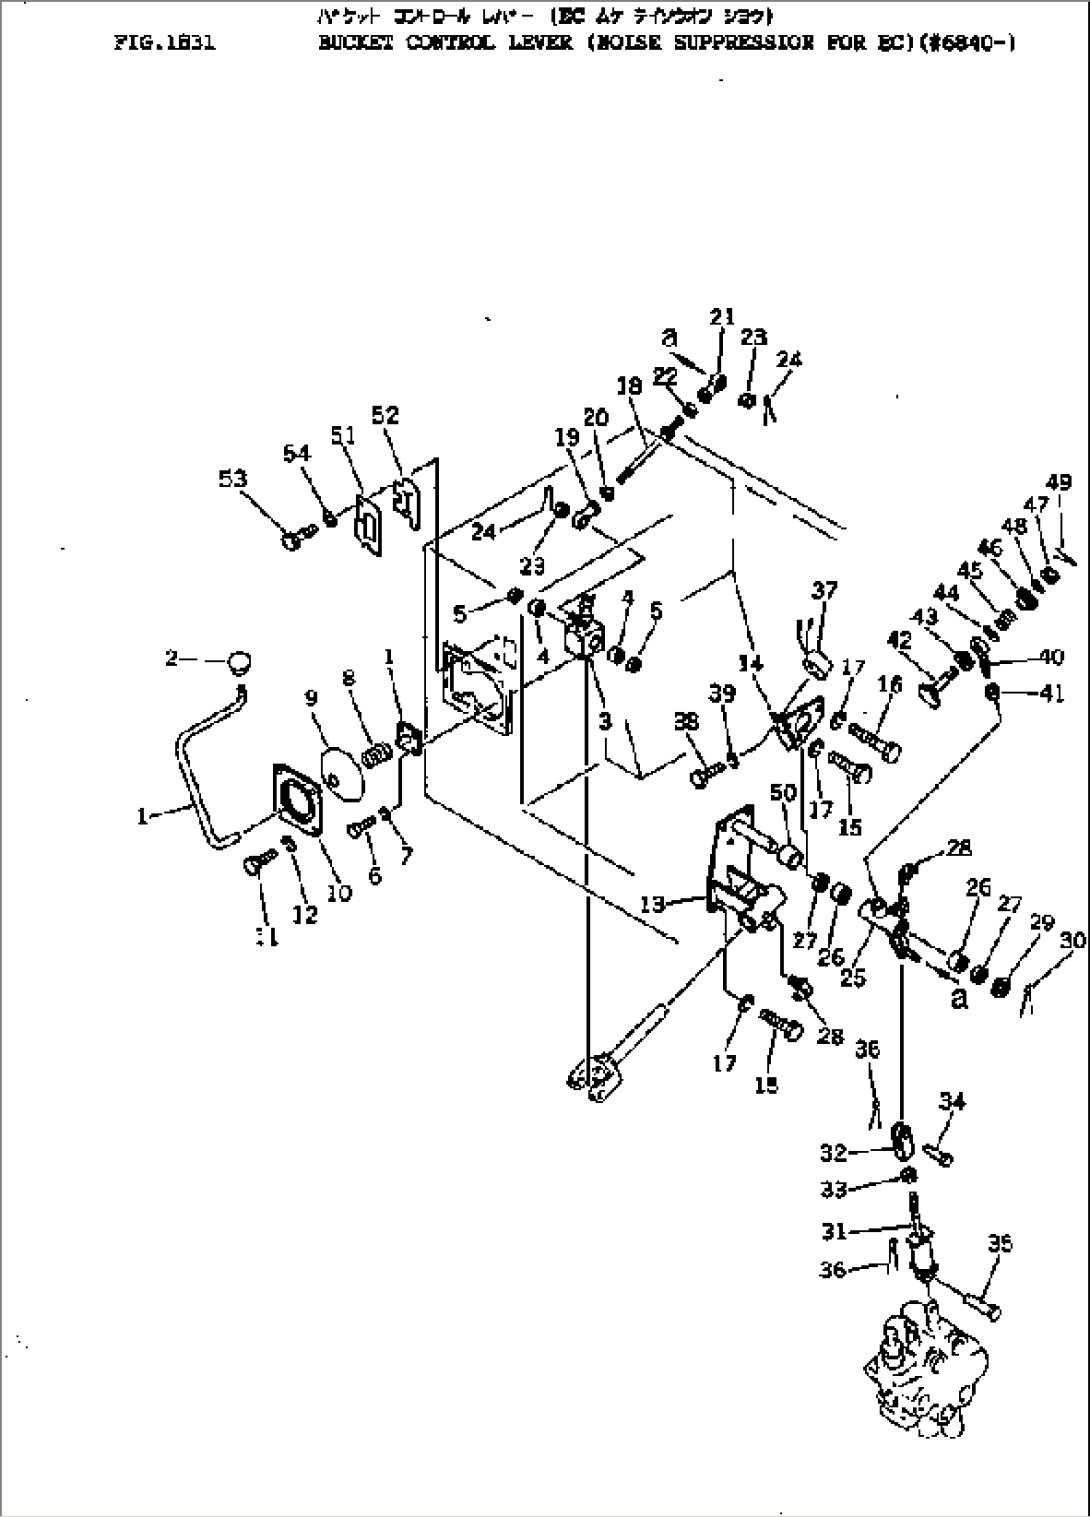 BUCKET CONTROL LEVER (NOISE SUPPRESSION FOR EC)(#6840-)